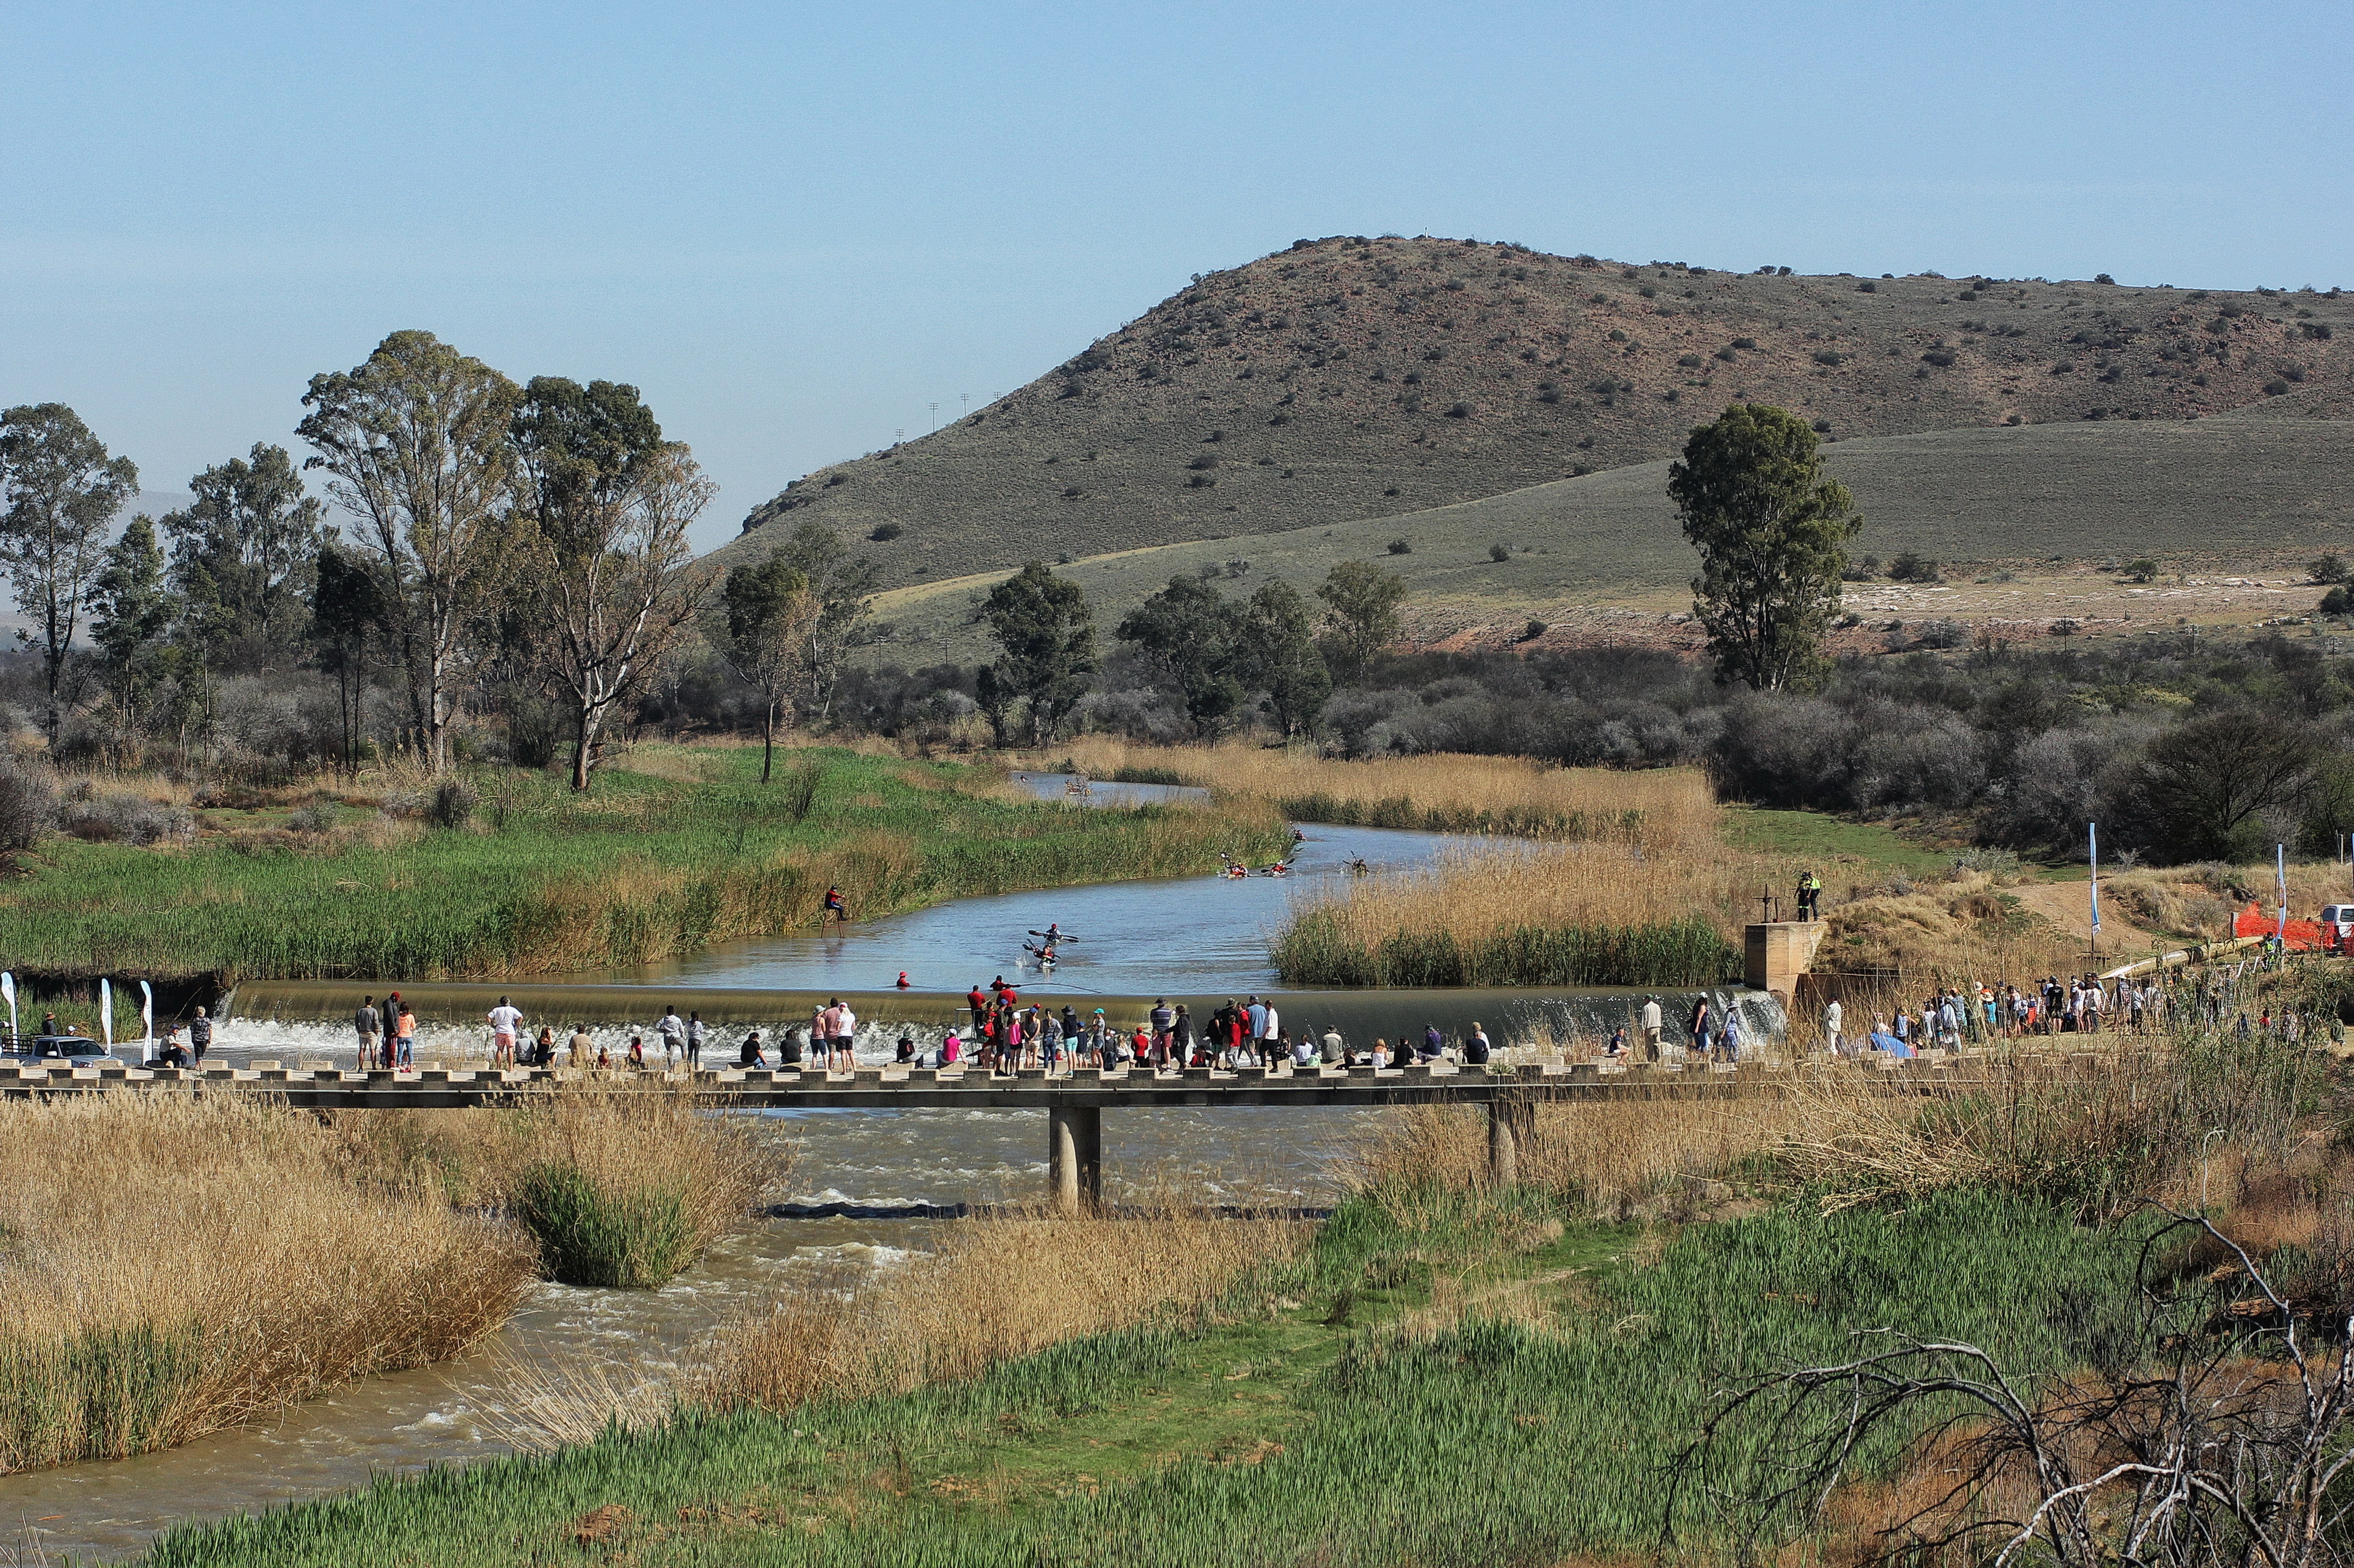 The Cradock Weir is a favourite spot for canoeists along the Fish River. Image: Chris Marais